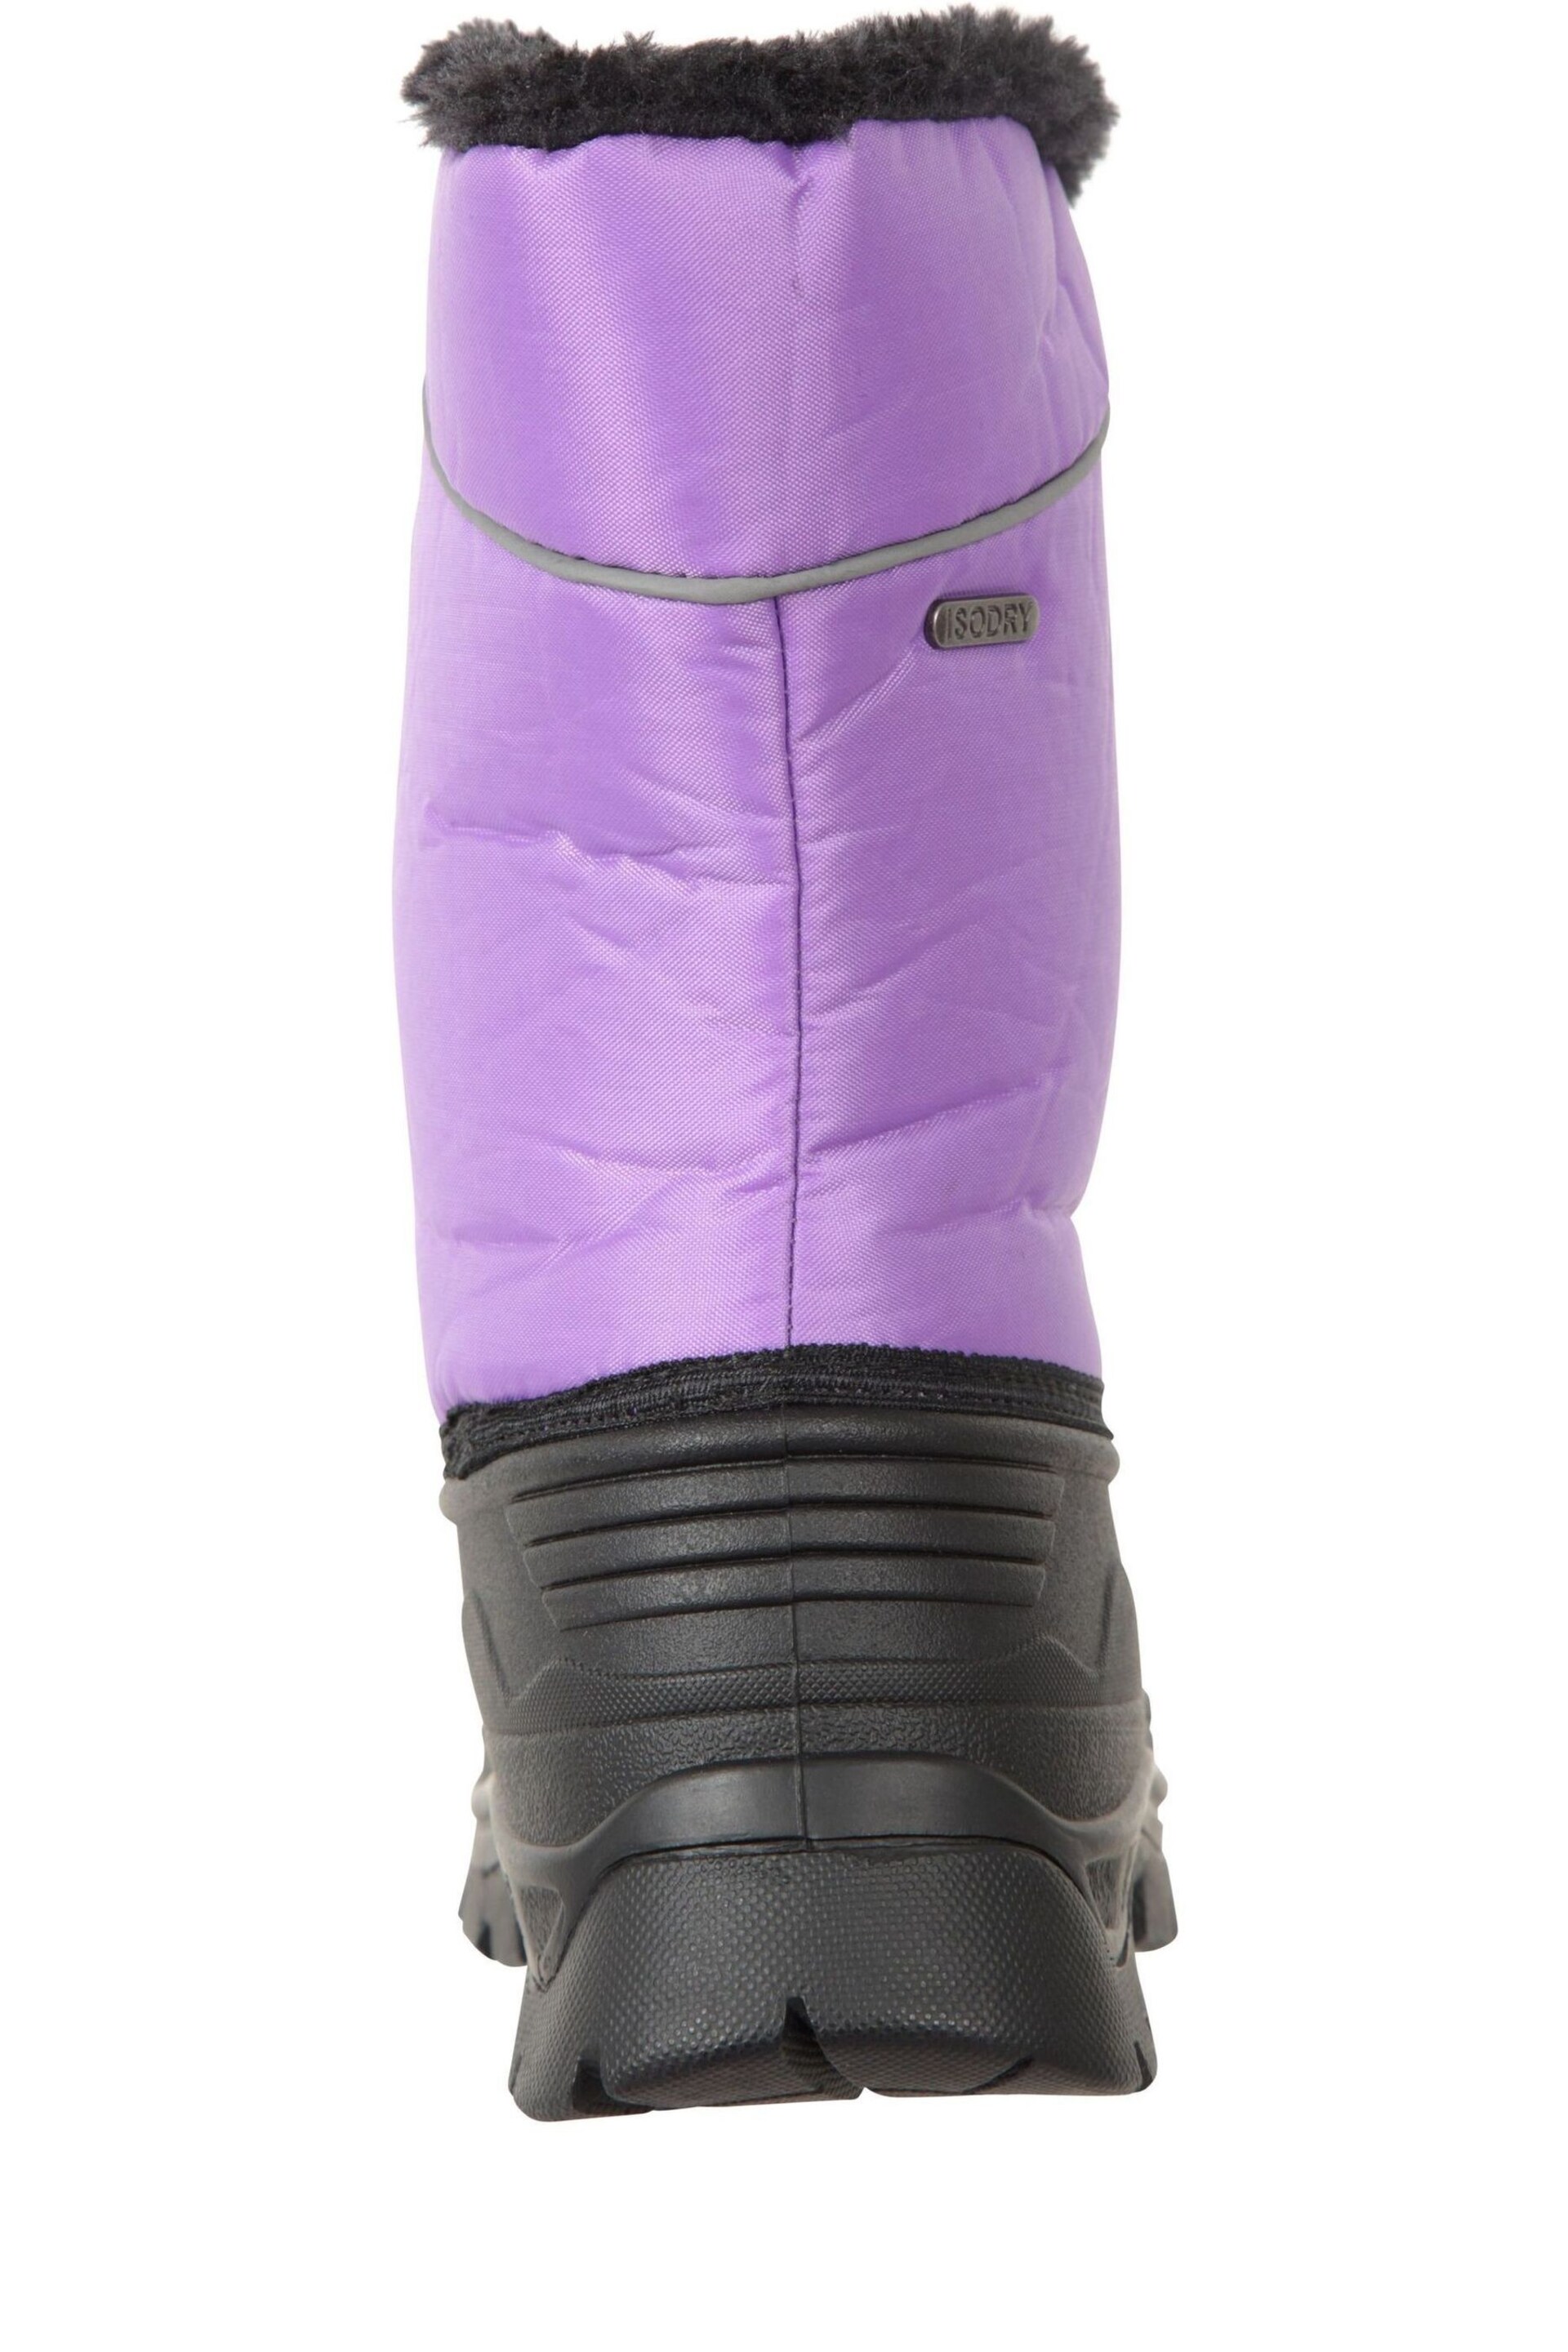 Mountain Warehouse Purple/Black Kids Whistler Sherpa Lined Snow Boots - Image 4 of 5